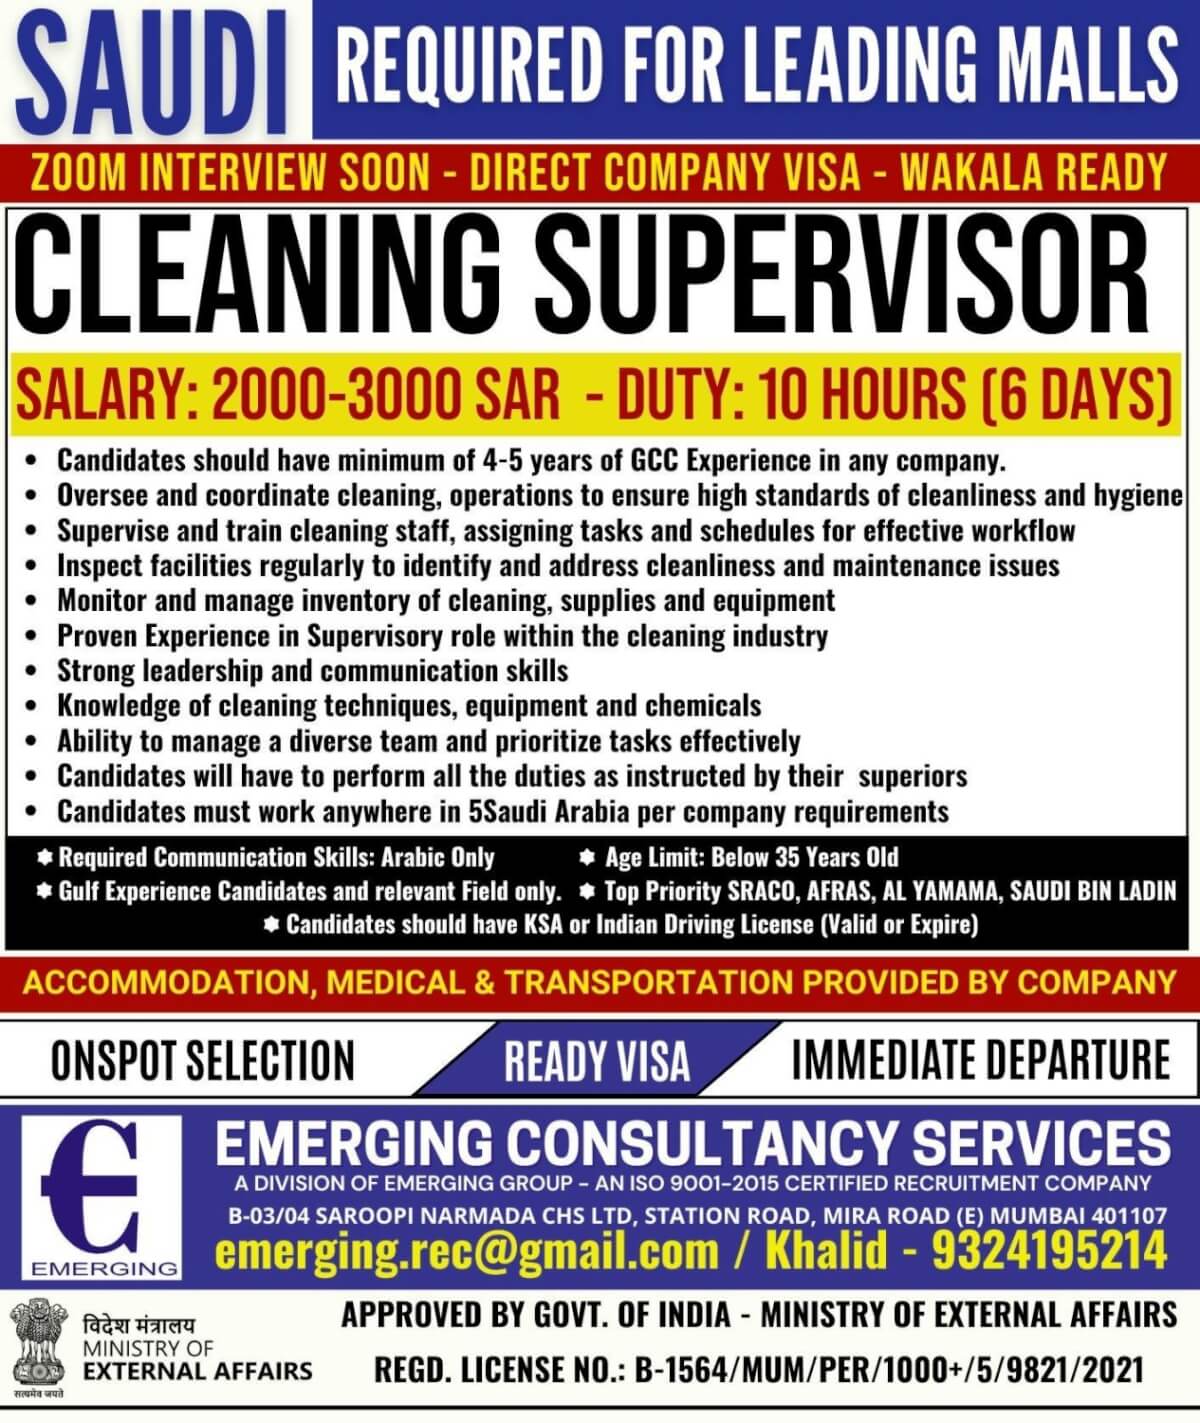 CLEANING SUPERVISOR REQUIRED FOR LEADING MALLS IN SAUDI ARABIA - WAKALA READY .